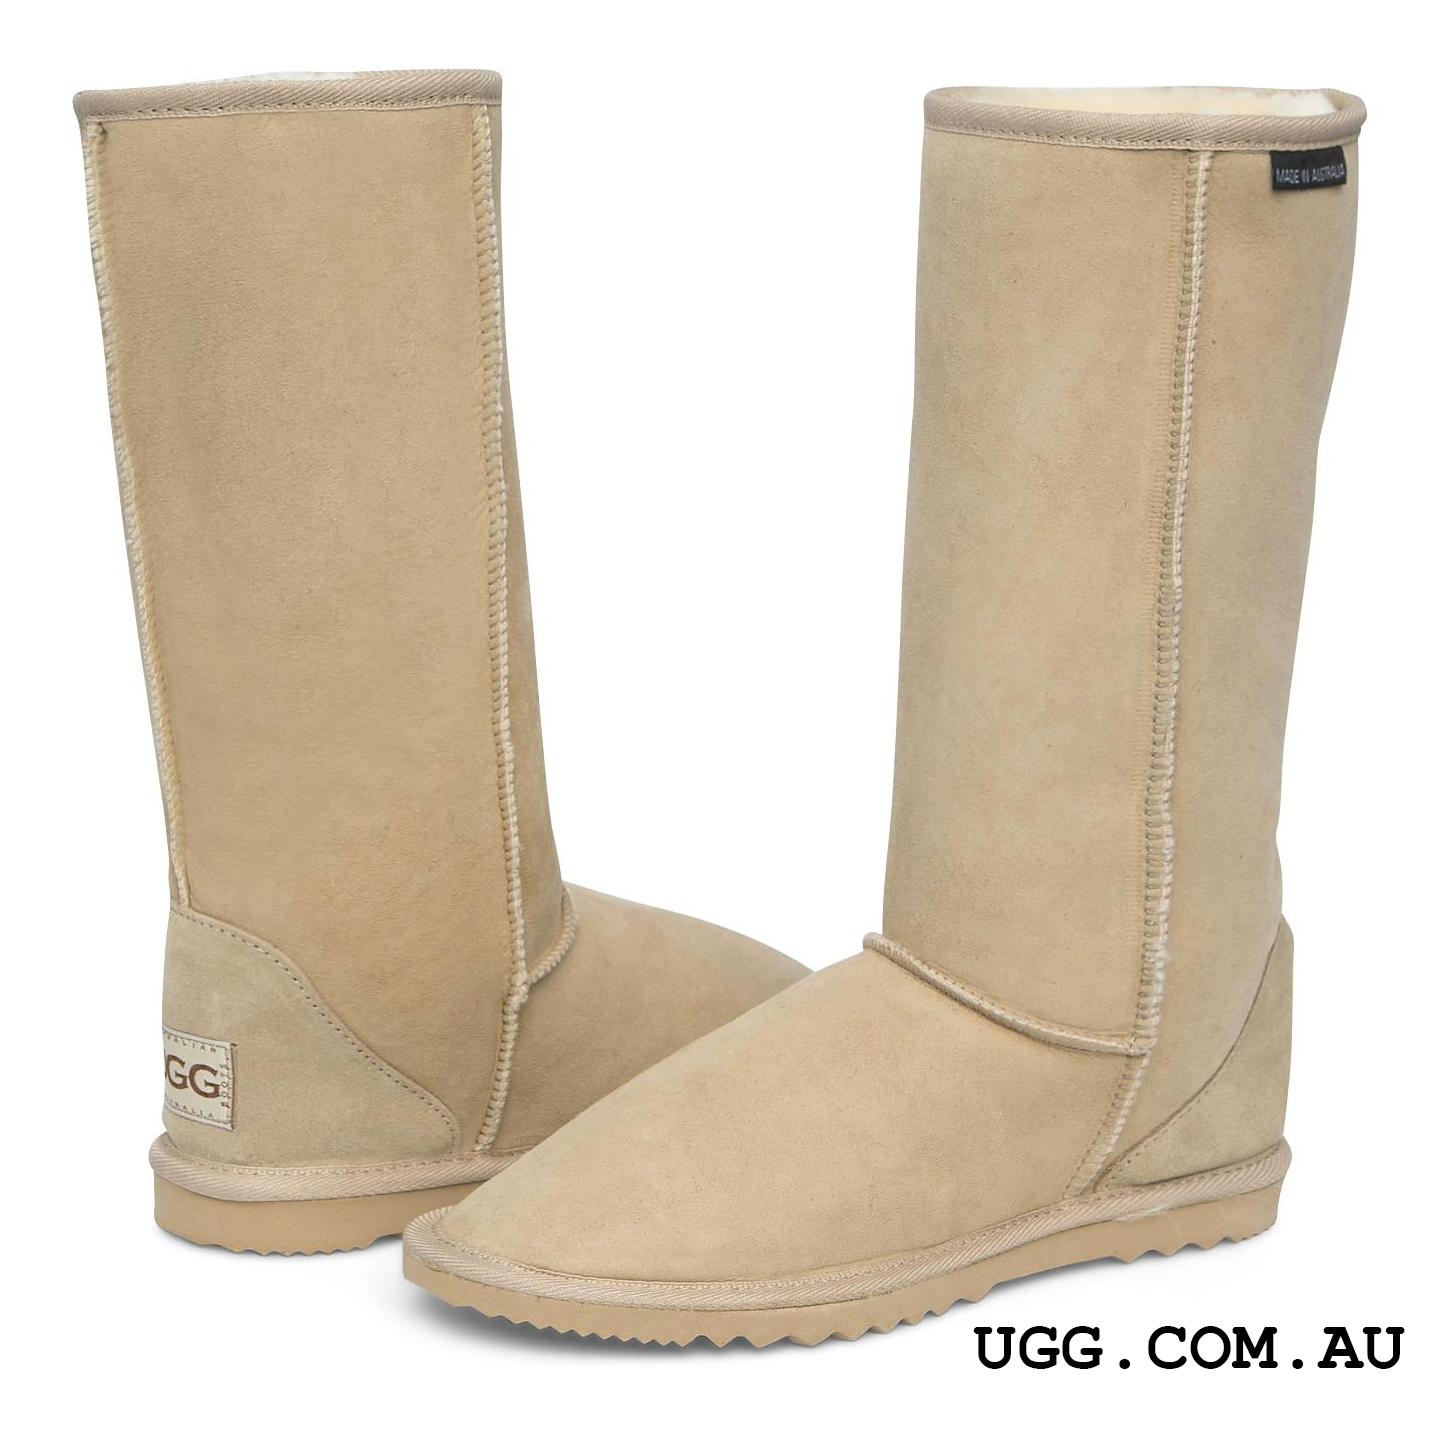 Classic Tall Ugg Boots (Extra Large Sizes)